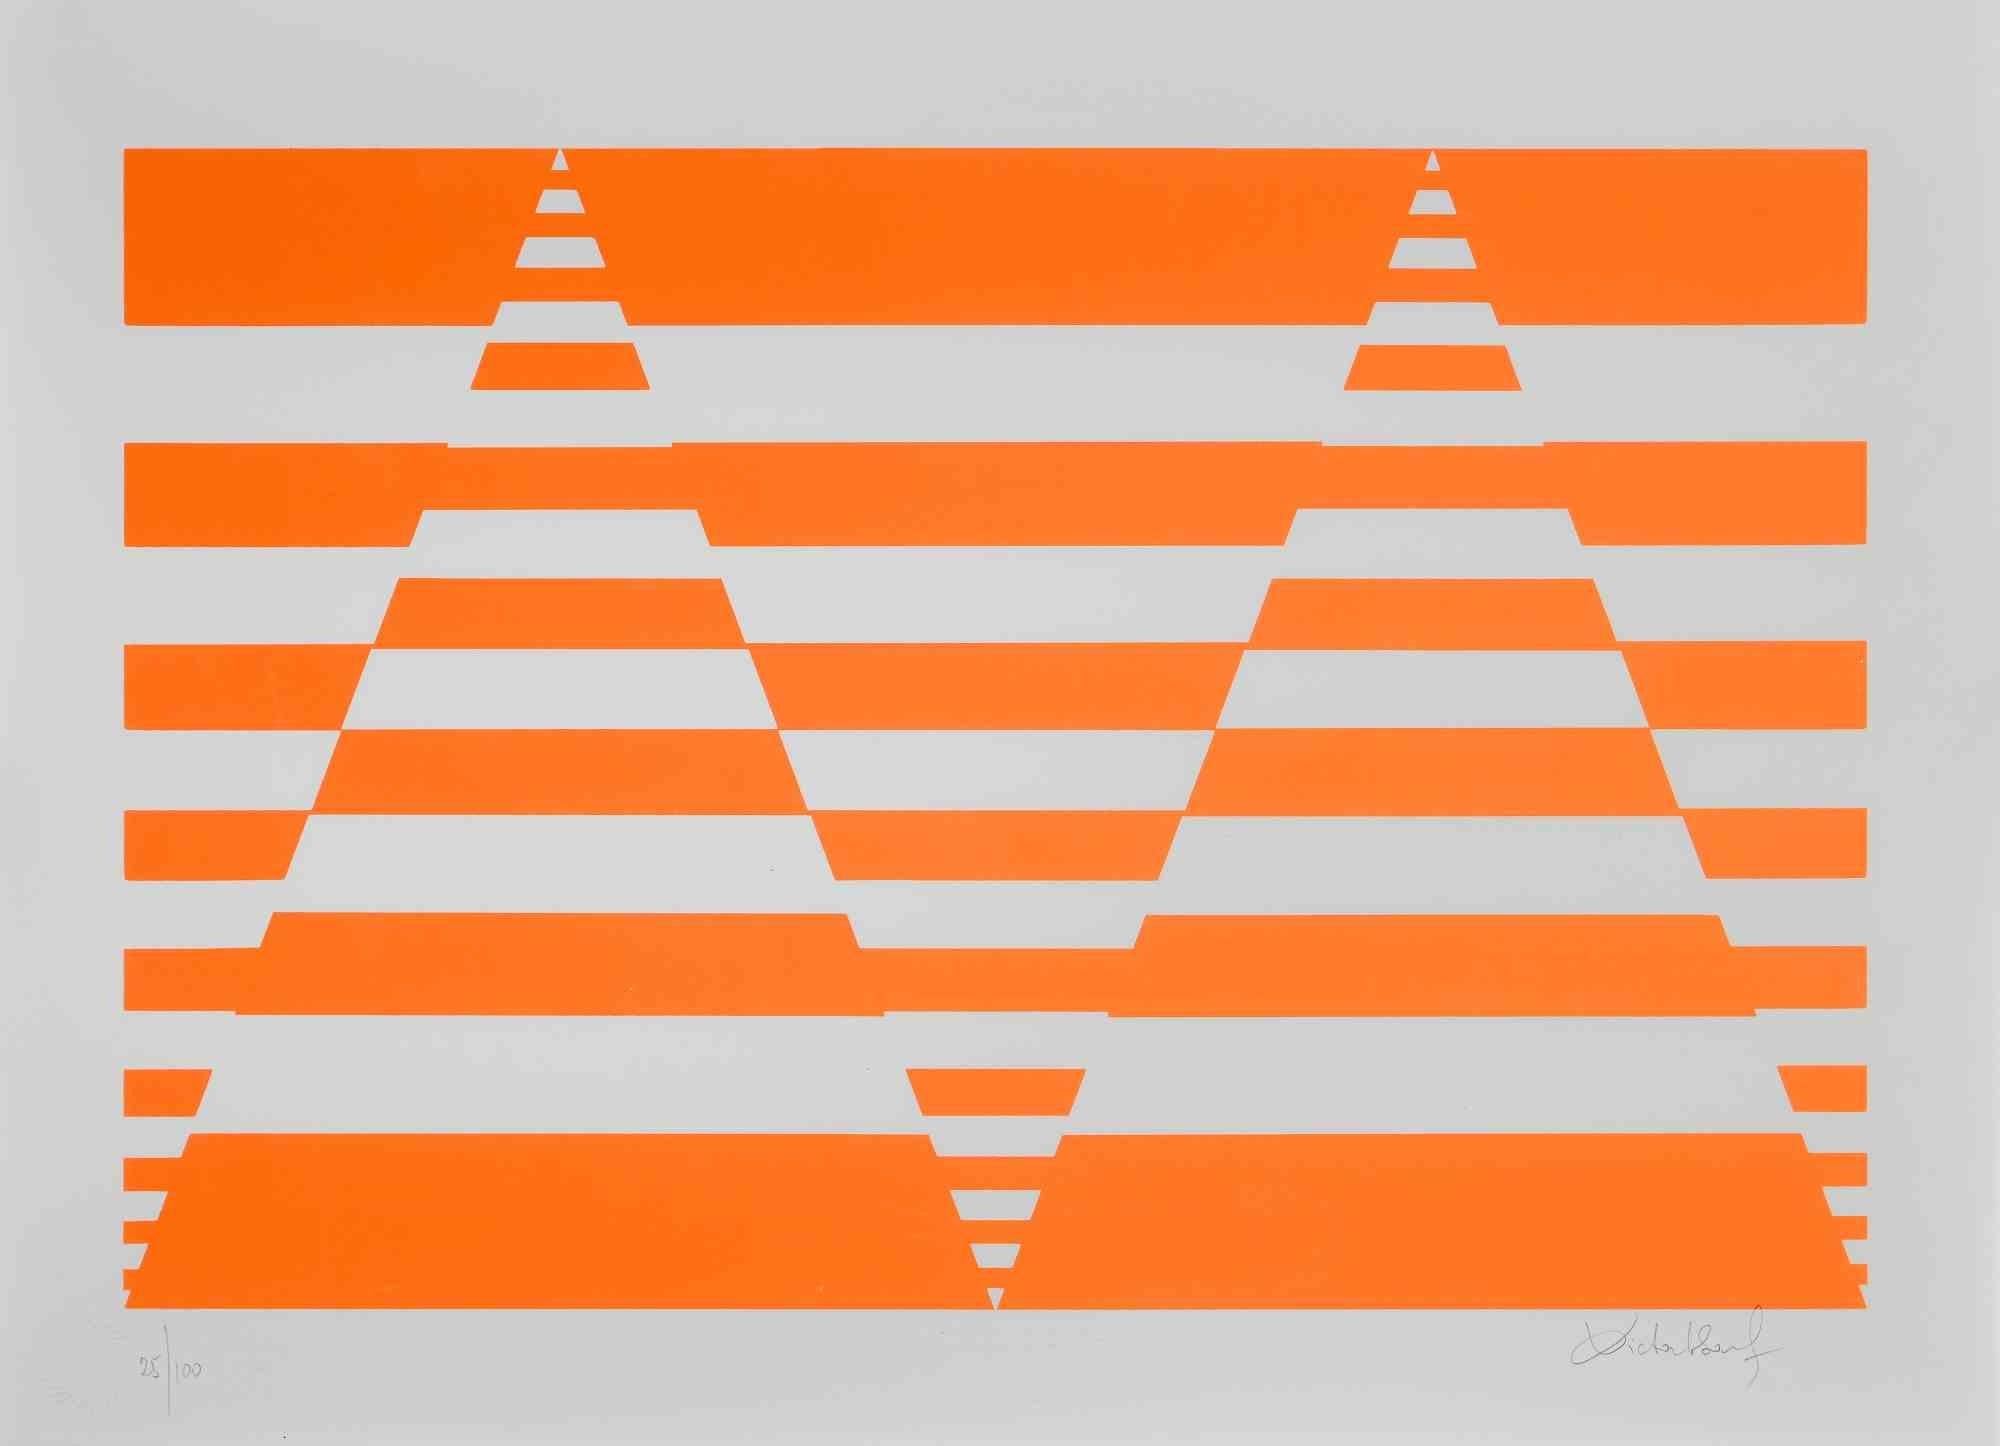 Fluo Orange Composition  is an original contemporary artwork realized by Victor Debach in the 1970s.

Mixed colored screen print on paper.

Hand signed on the lower right margin.

Numbered on the lower left.

Edition of 25/100.